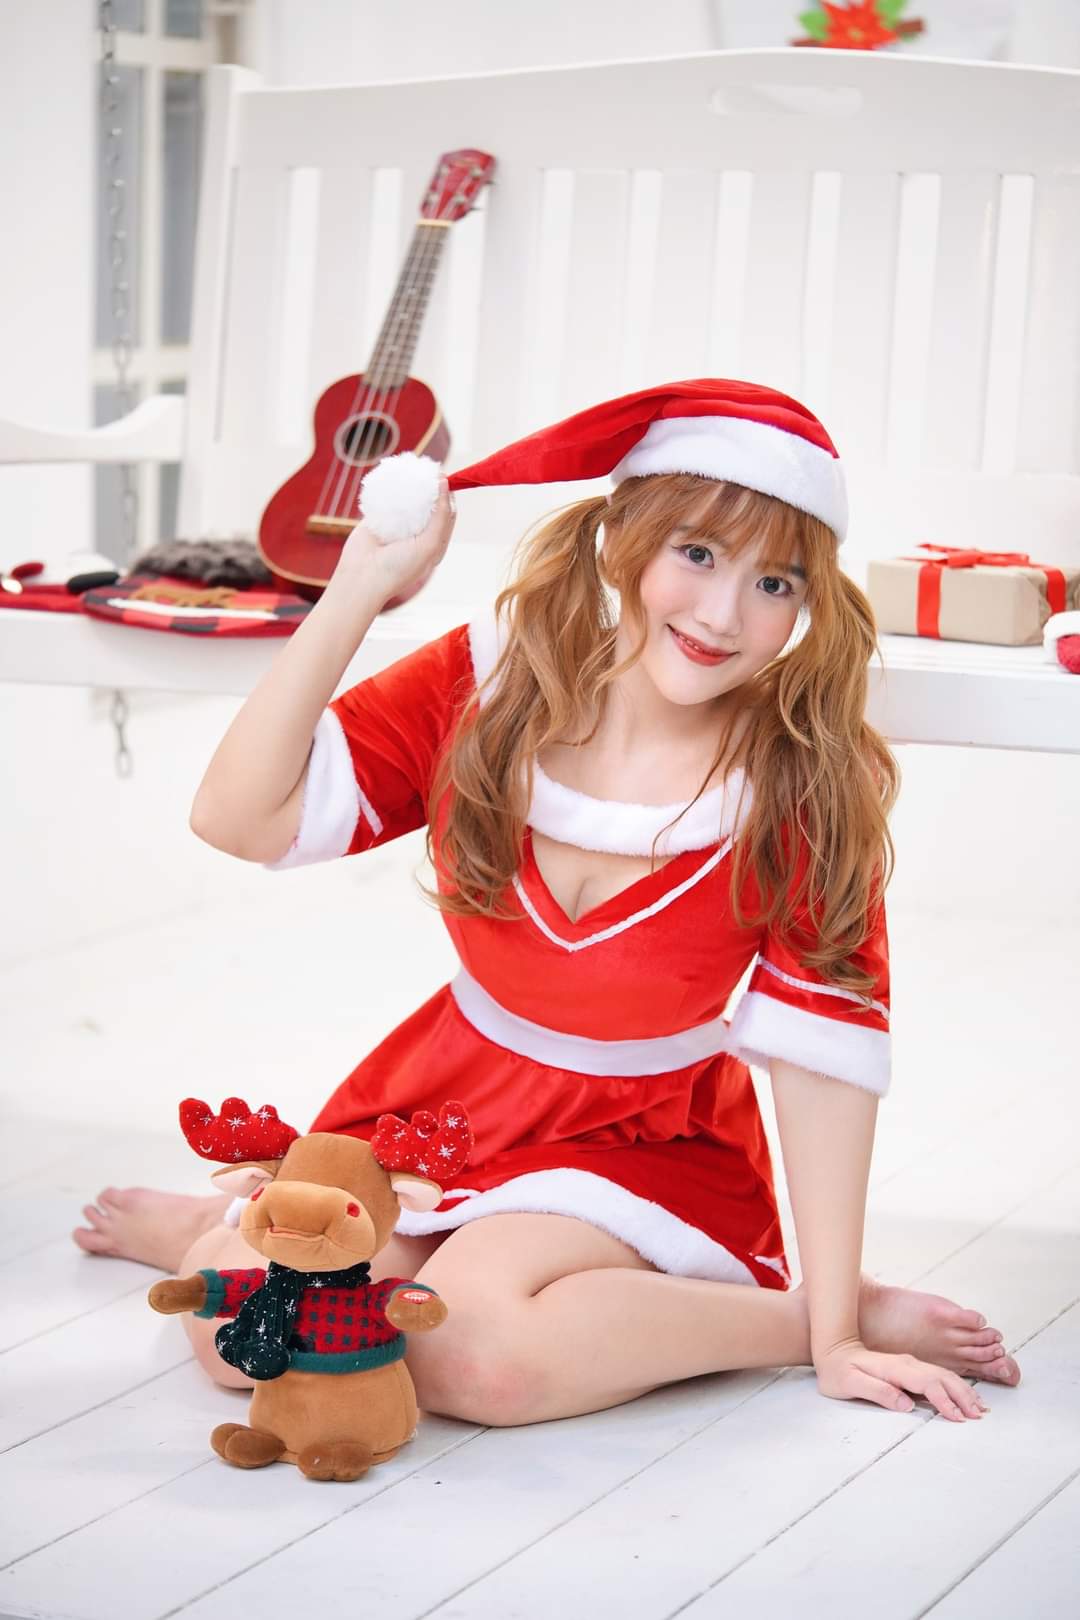 Sermsiri Jirathiraphap |  Delightful Christmas Photoshoot with a Little Angel in a Red. Thailand hot girls. hot photos. Christmas celebration.